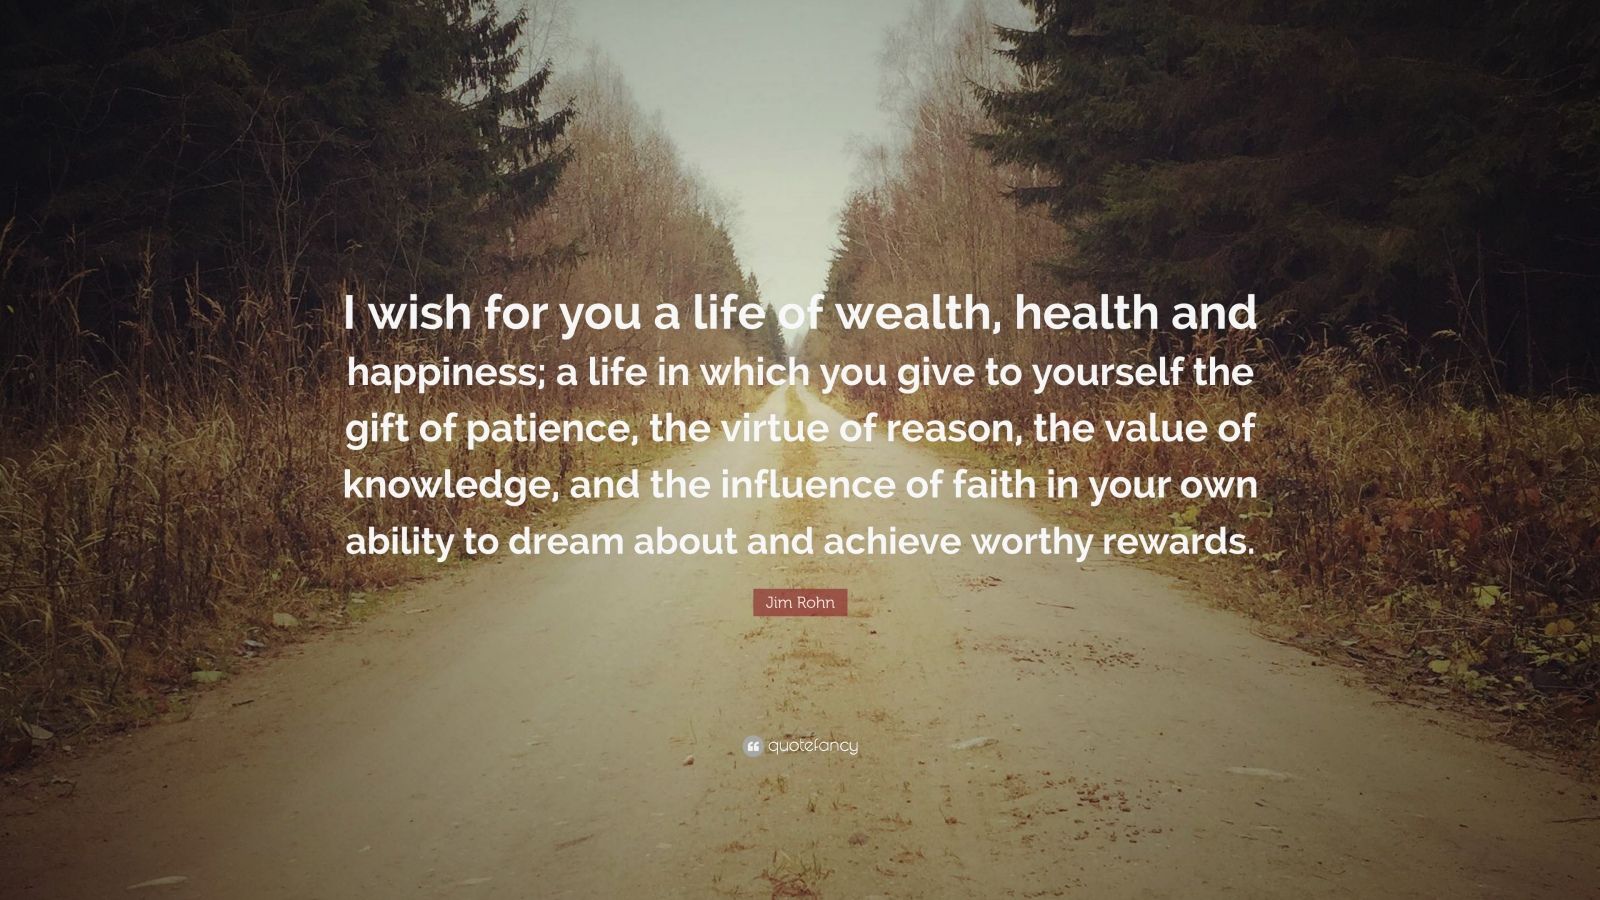 Jim Rohn Quote: “I wish for you a life of wealth, health and happiness